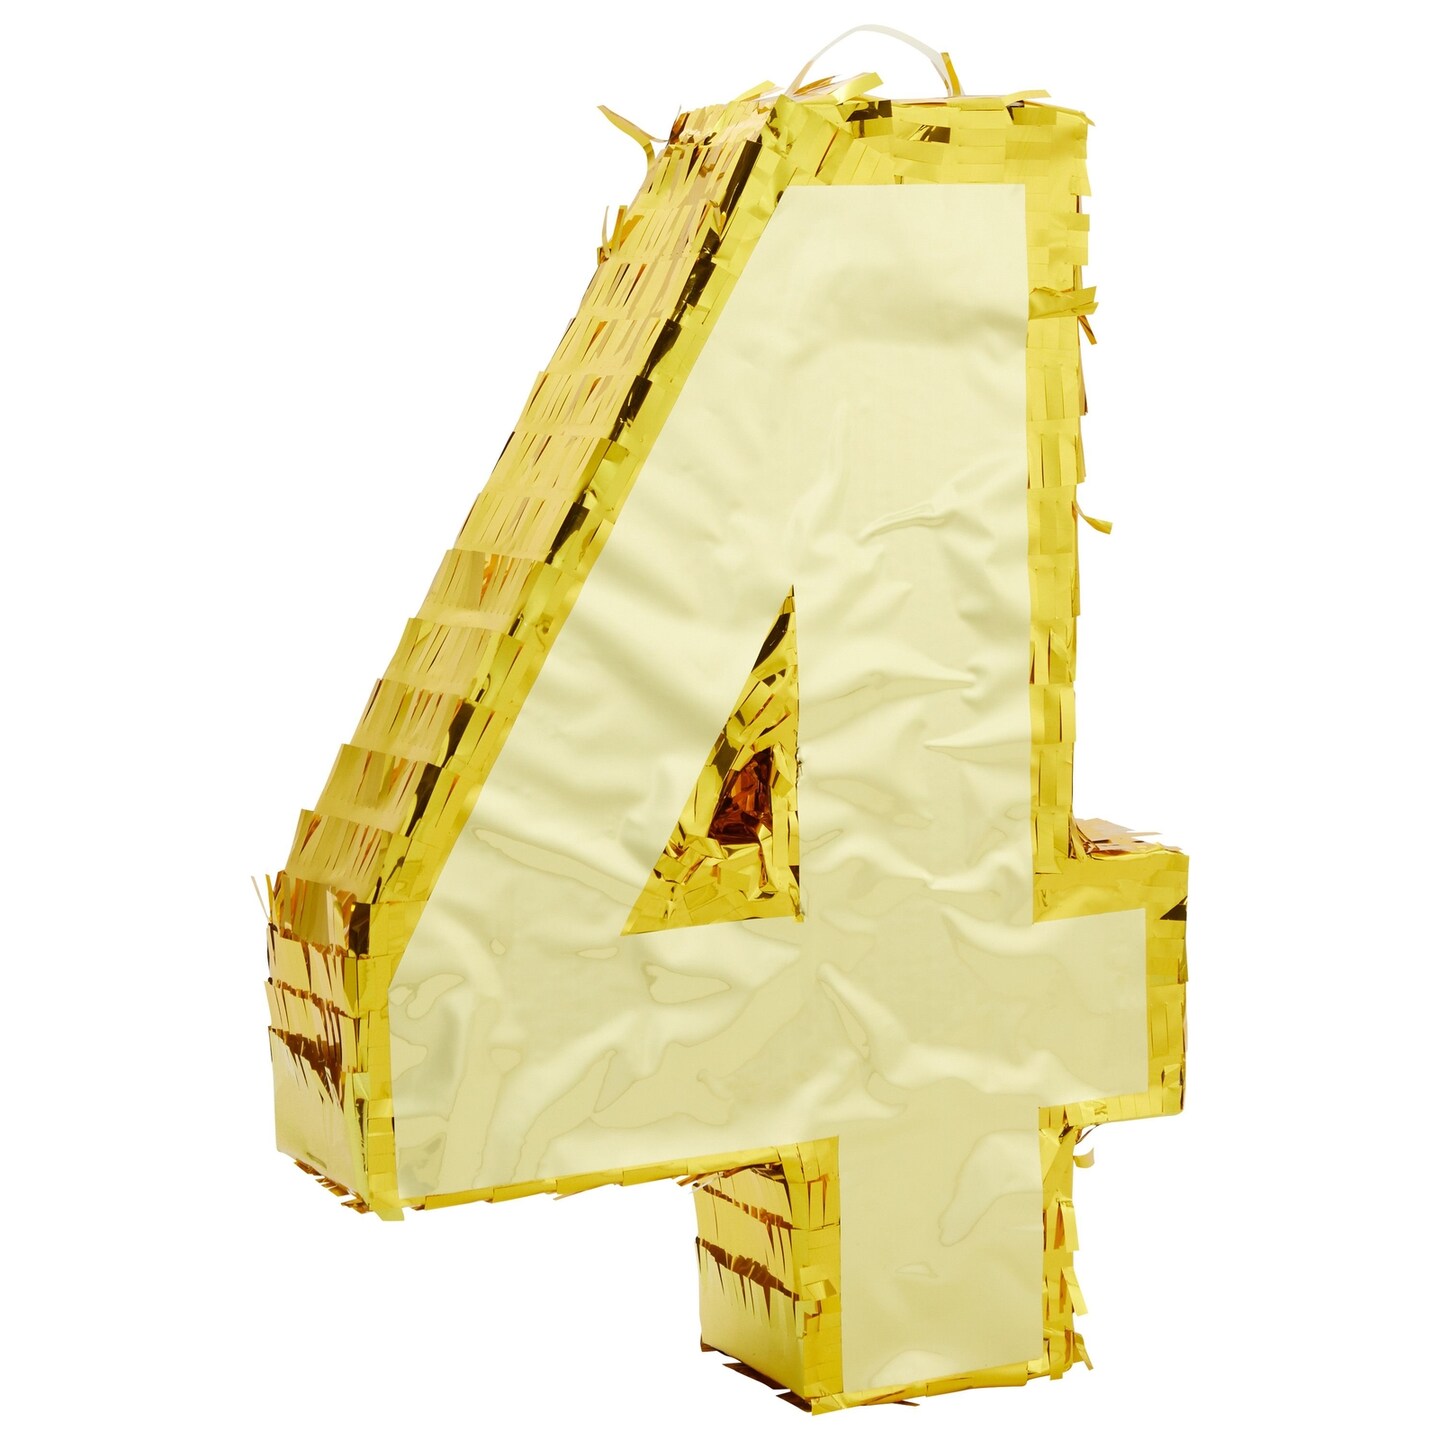 Gold Foil Number 4 Pinata for 4th Birthday Party Decorations, Anniversary Celebrations (Small, 15.5 x 11 x 3 In)